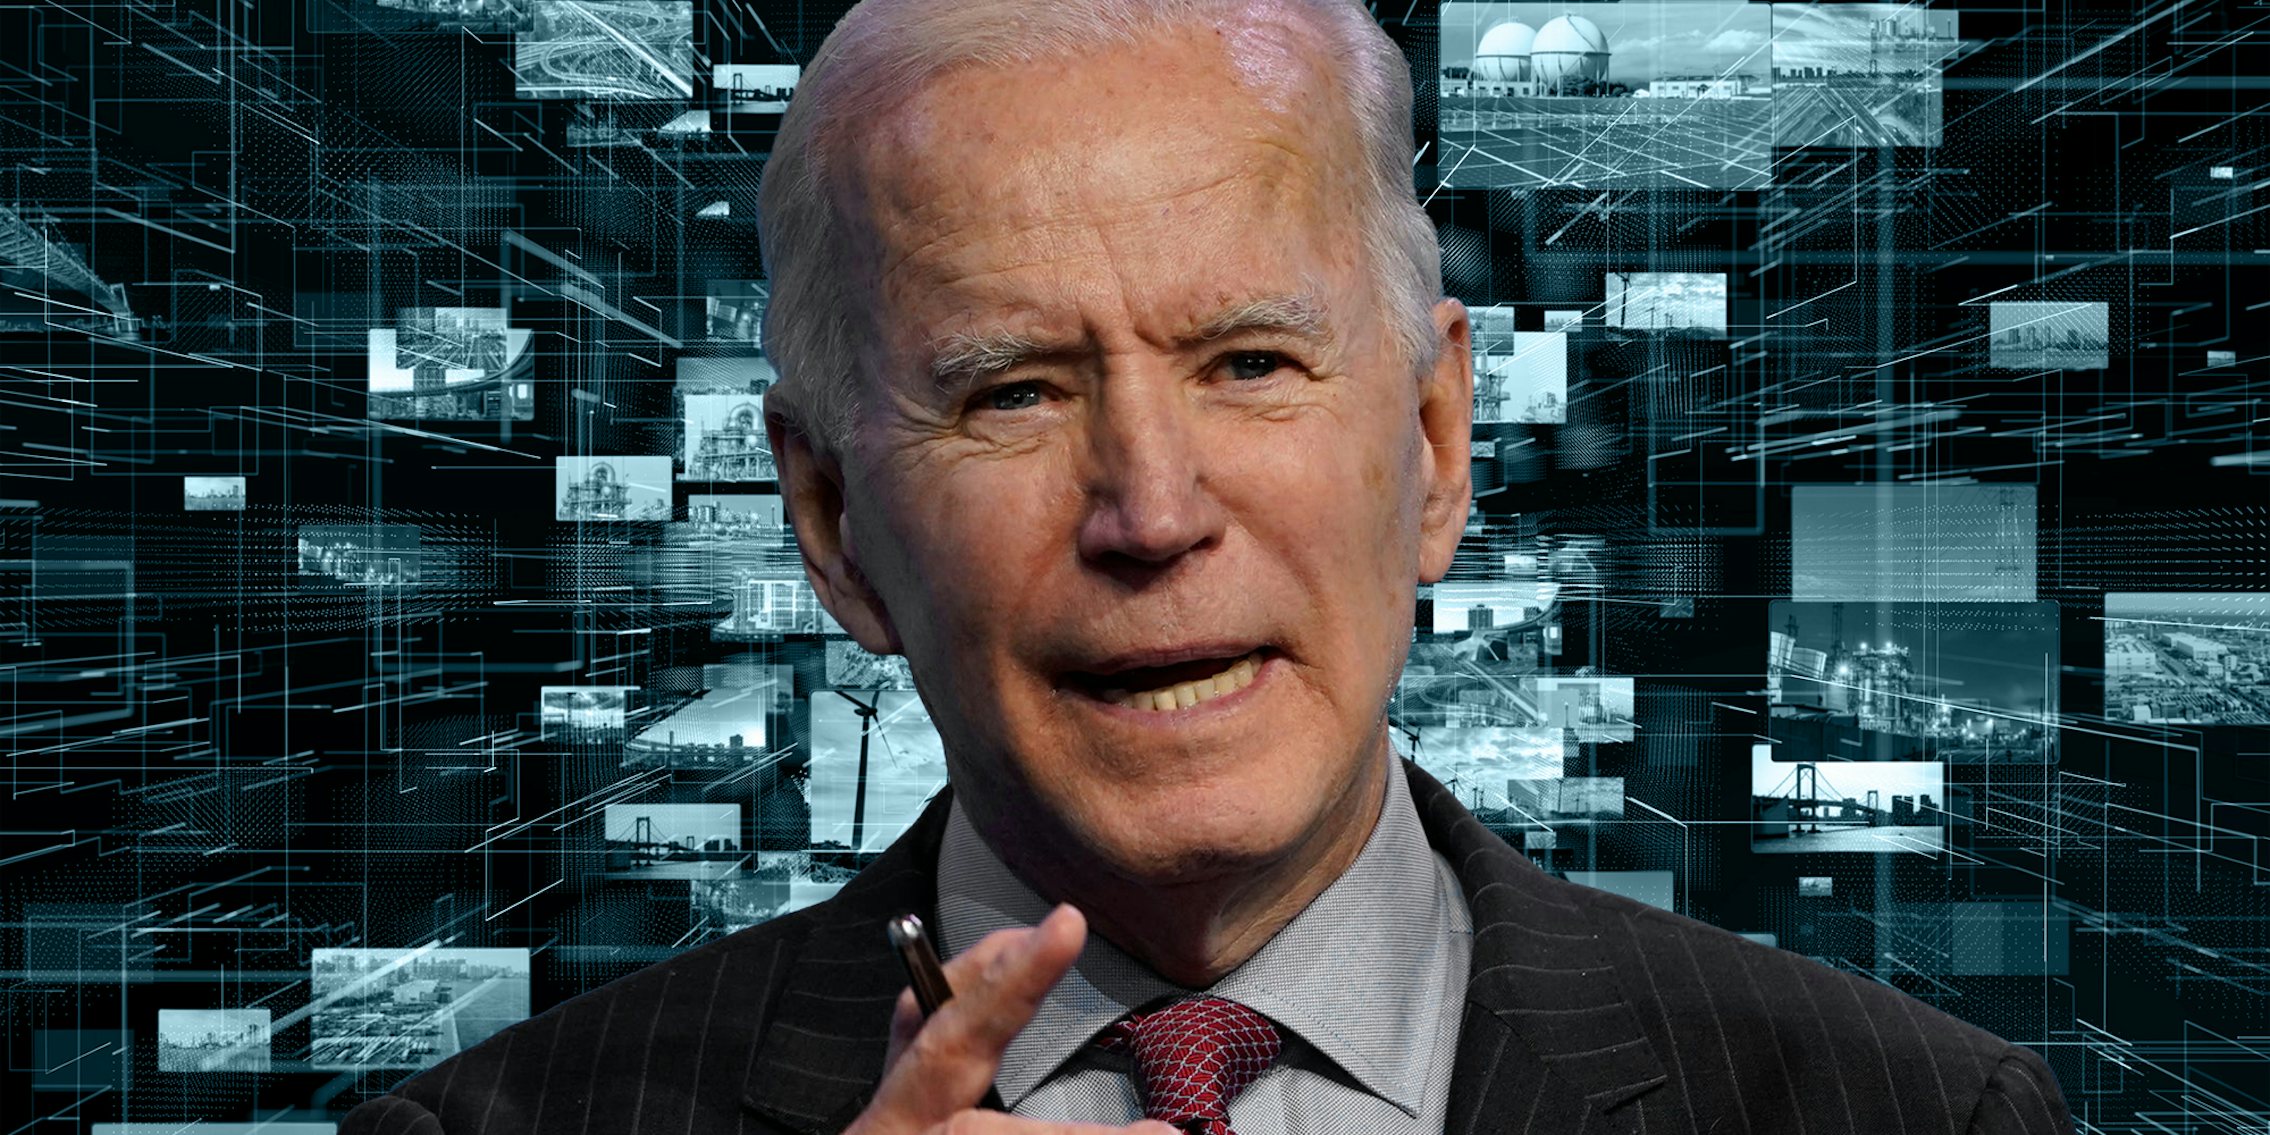 joe biden over background of images at different sizes and distances